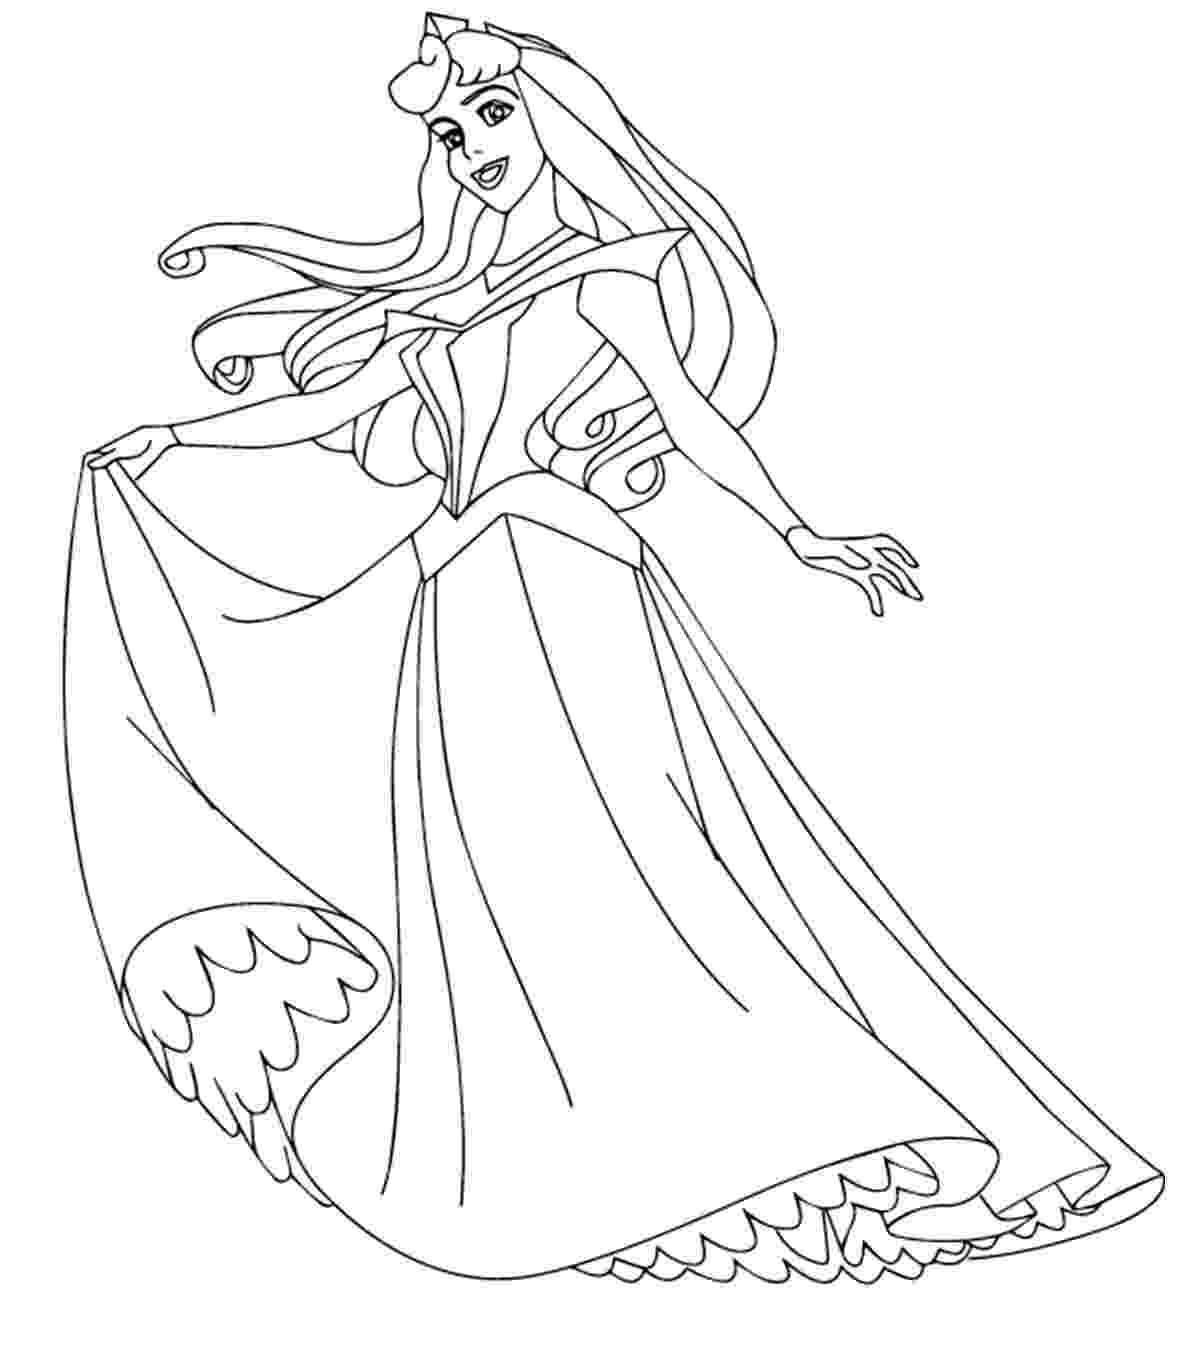 printable coloring pages for disney princess disney princess coloring pages to print to download and princess coloring printable for pages disney 